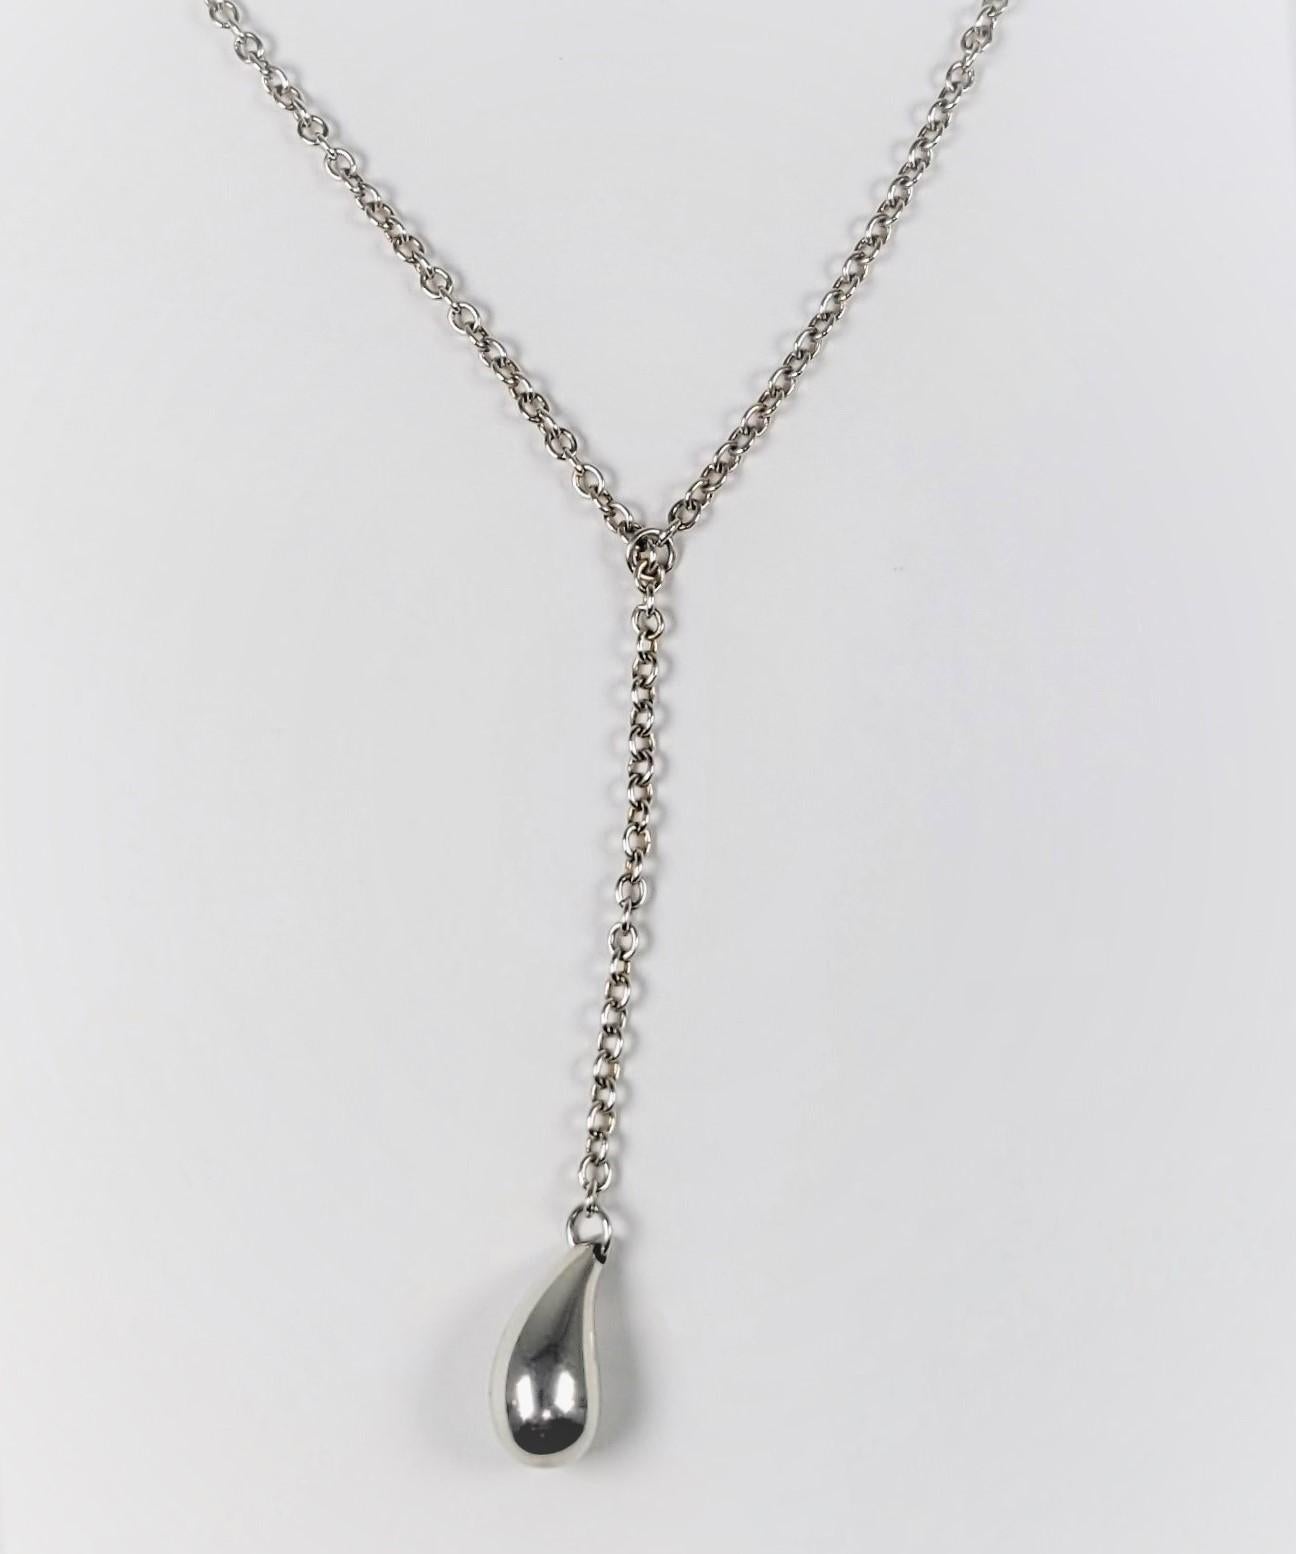 Classic and versatile, this Tiffany and Co. teardrop lariat necklace by Elsa Peretti is the perfect addition to any wardrobe!  This 19 inch necklace is adjustable to different lengths, and is made of sterling silver.  The teardrop is 1.2mm in length.